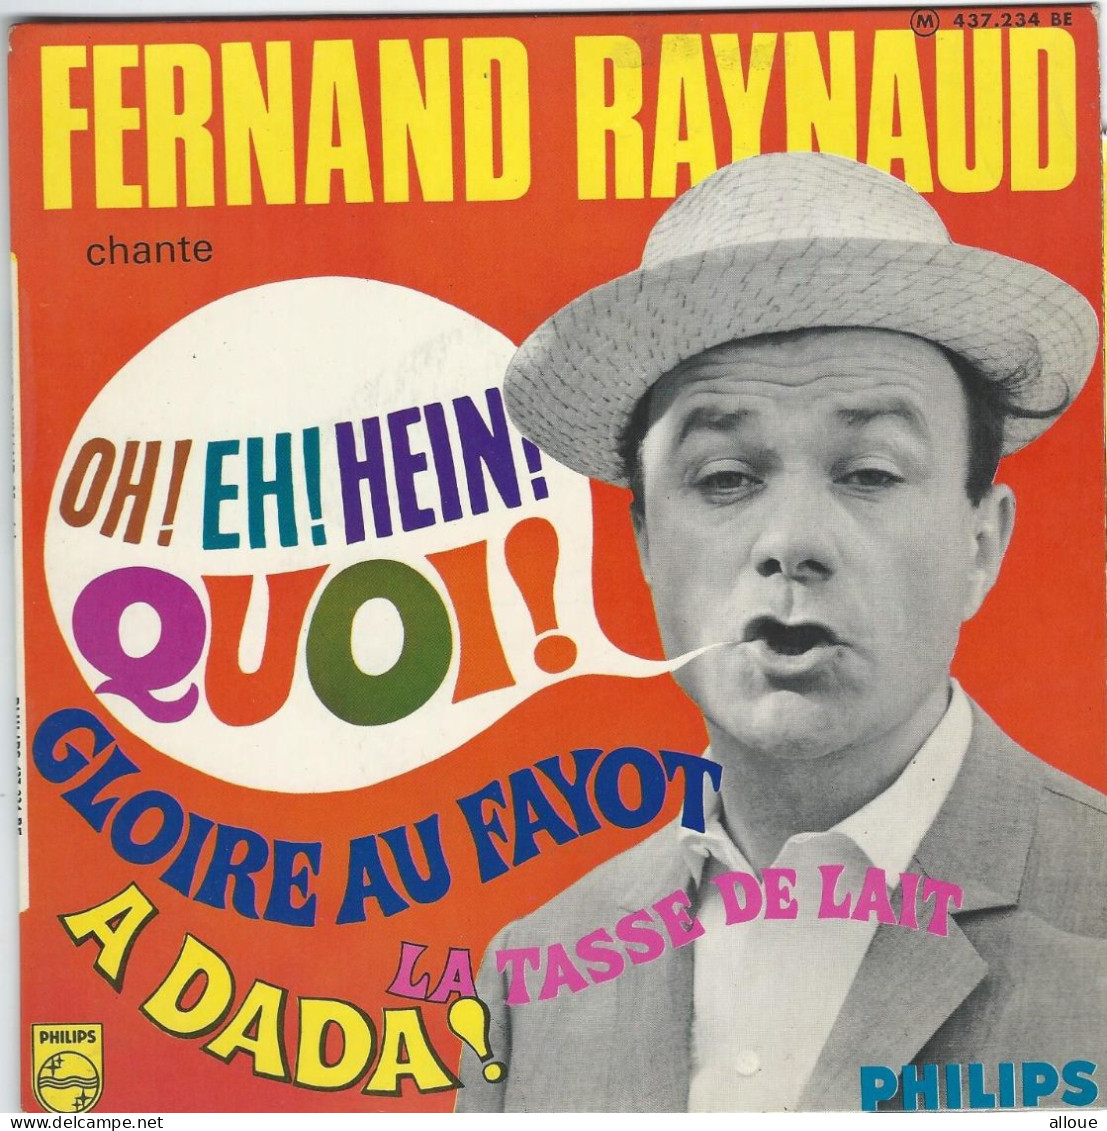 FERNAND RAYNAUD - FR EP - OH! EH! HEIN! QUOI! + 3 - Humor, Cabaret